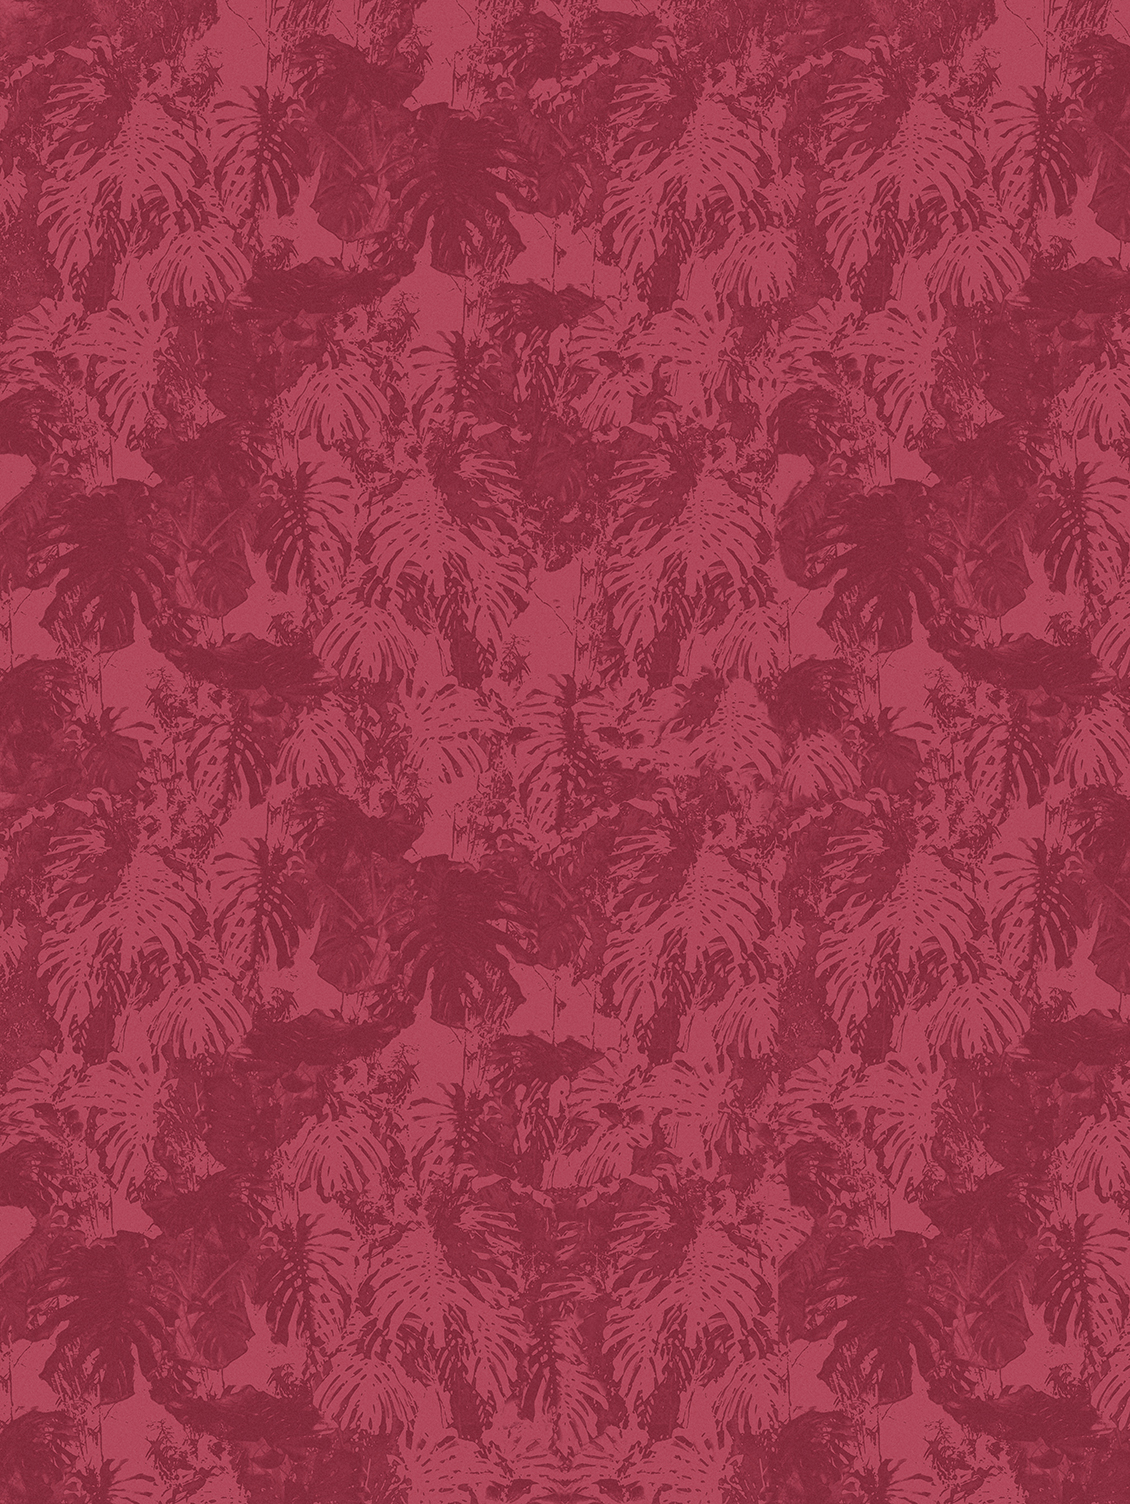 Wallpaper in shades of red with texture of tropical leaves, fabric effect